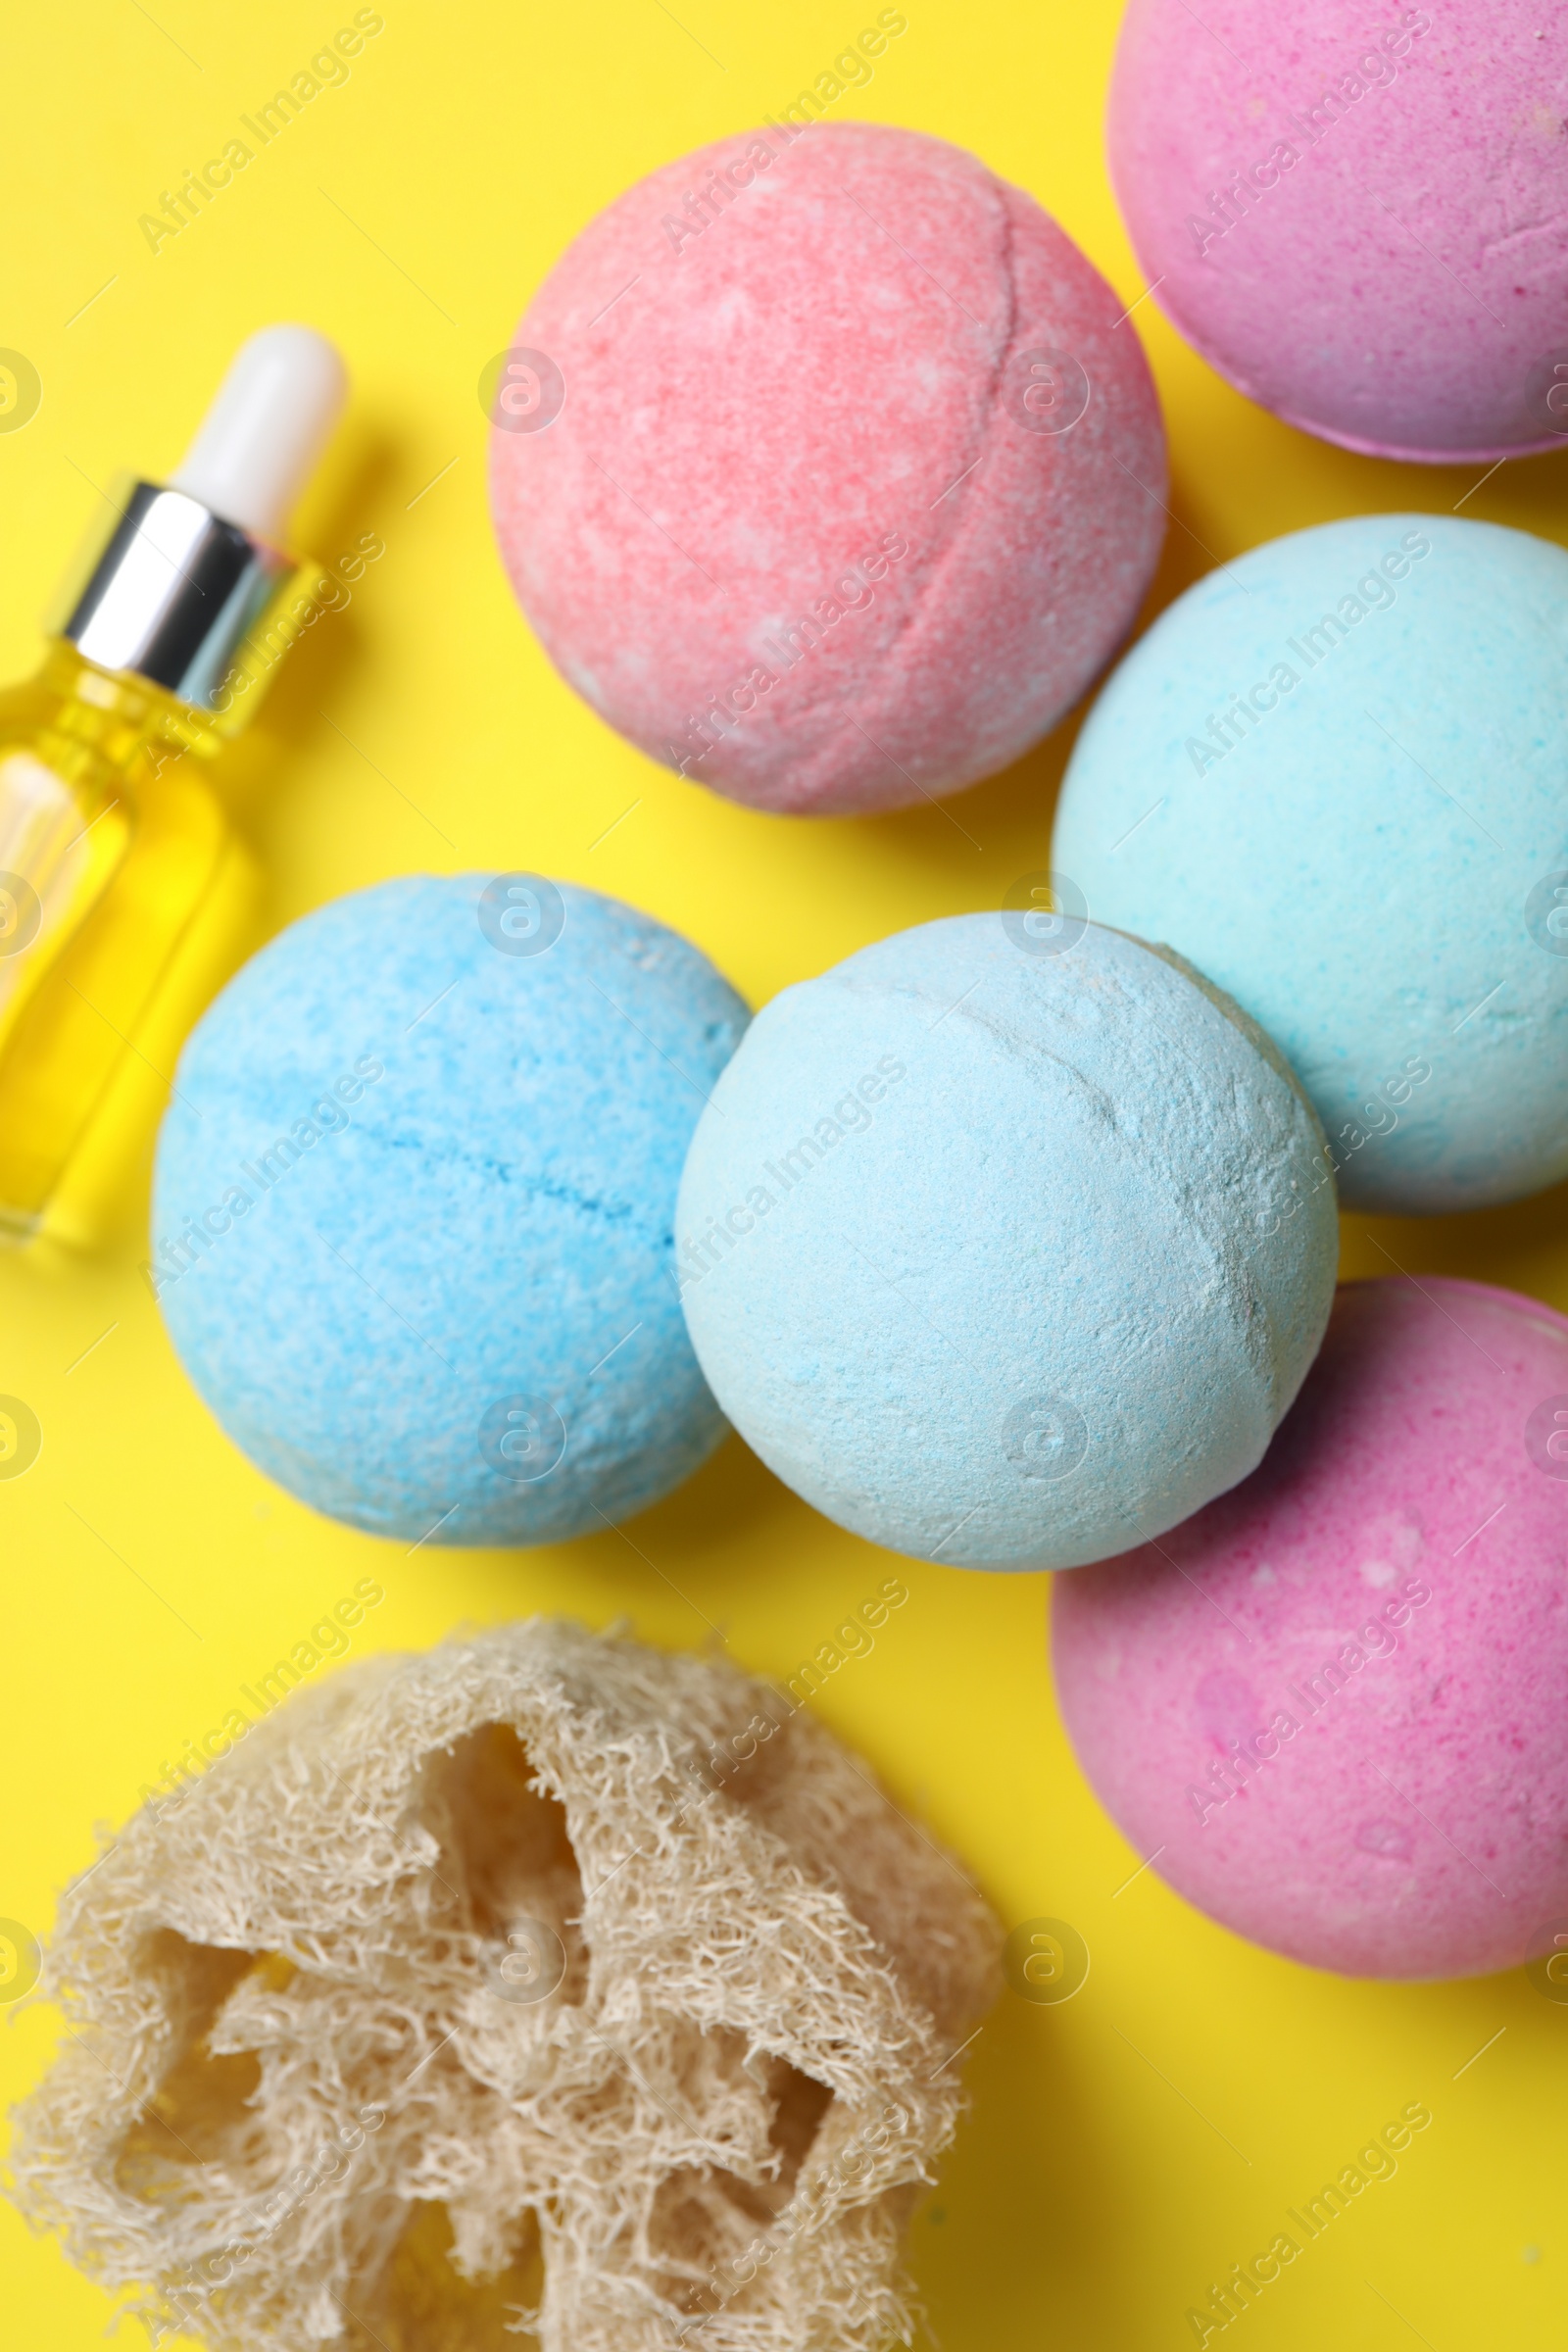 Photo of Bath bombs, loofah sponge and bottle on yellow background, above view